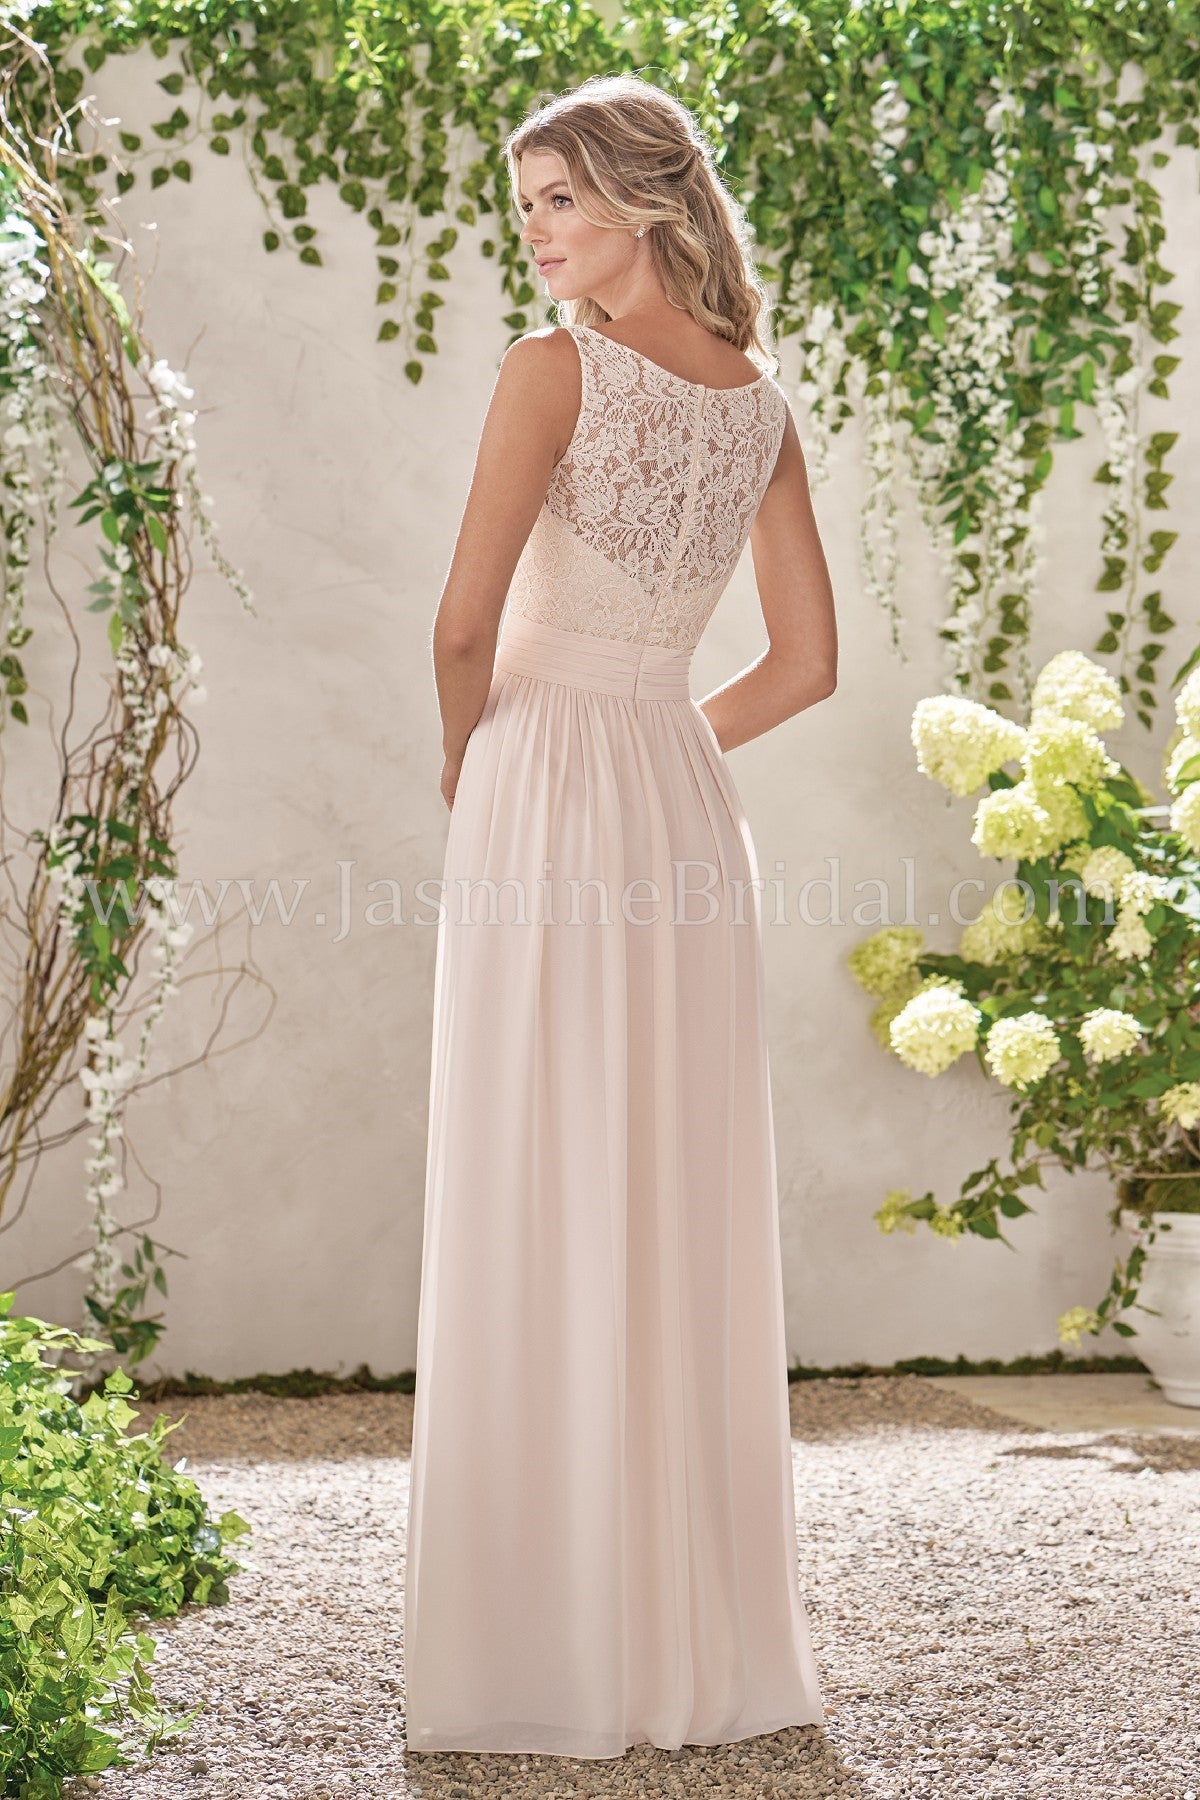 Poly Chiffon V-Neck Dress with Lace and Rouching - Available Long or Short - Several Colors - Sizes 00-34 - In Store ONLY